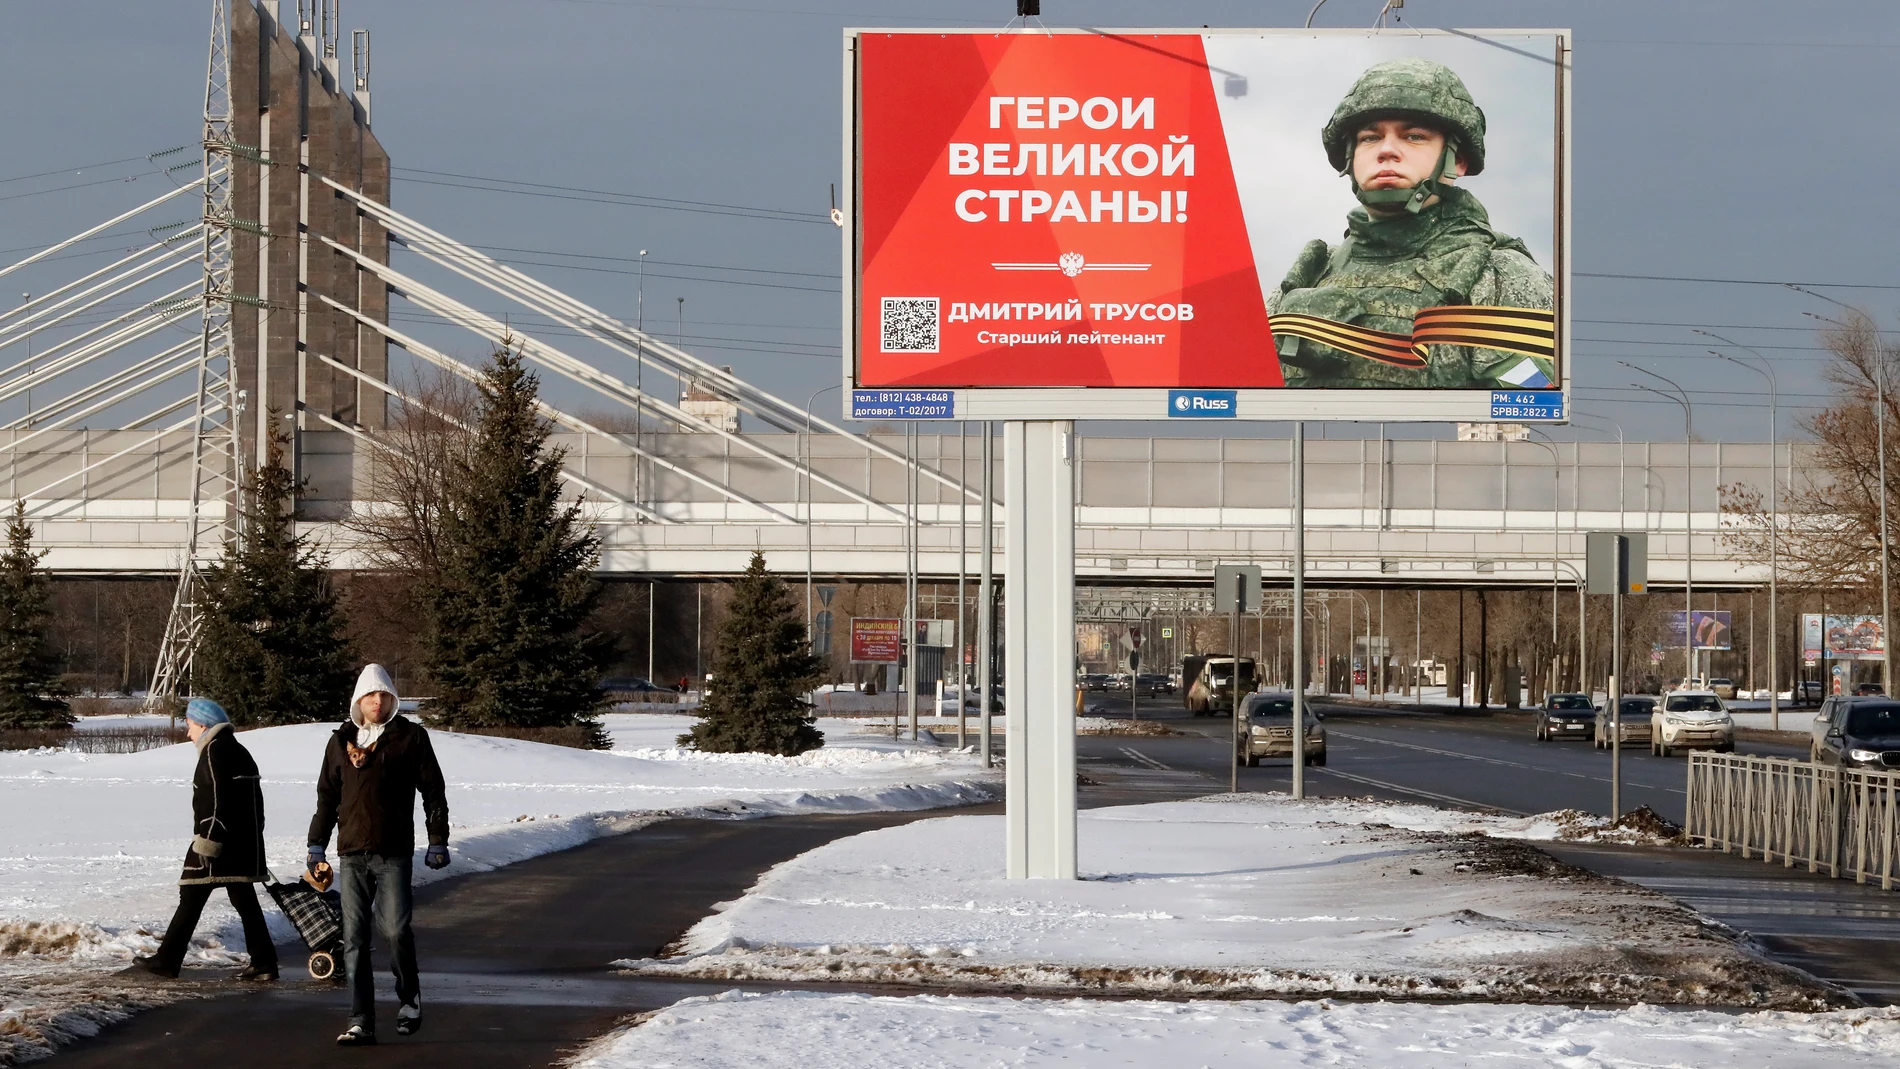 St. Petersburg (Russian Federation), 27/02/2023.- People cross a street under a billboard depicting a soldier with the slogan 'Glory to the Heroes of Russia' in St. Petersburg, Russia, 27 February 2023. On 24 February 2022 Russian troops entered the Ukrainian territory in what the Russian president declared to be a 'Special Military Operation', starting an armed conflict that has provoked destruction and a humanitarian crisis. (Rusia, San Petersburgo, San Petersburgo) EFE/EPA/ANATOLY MALTSEV 